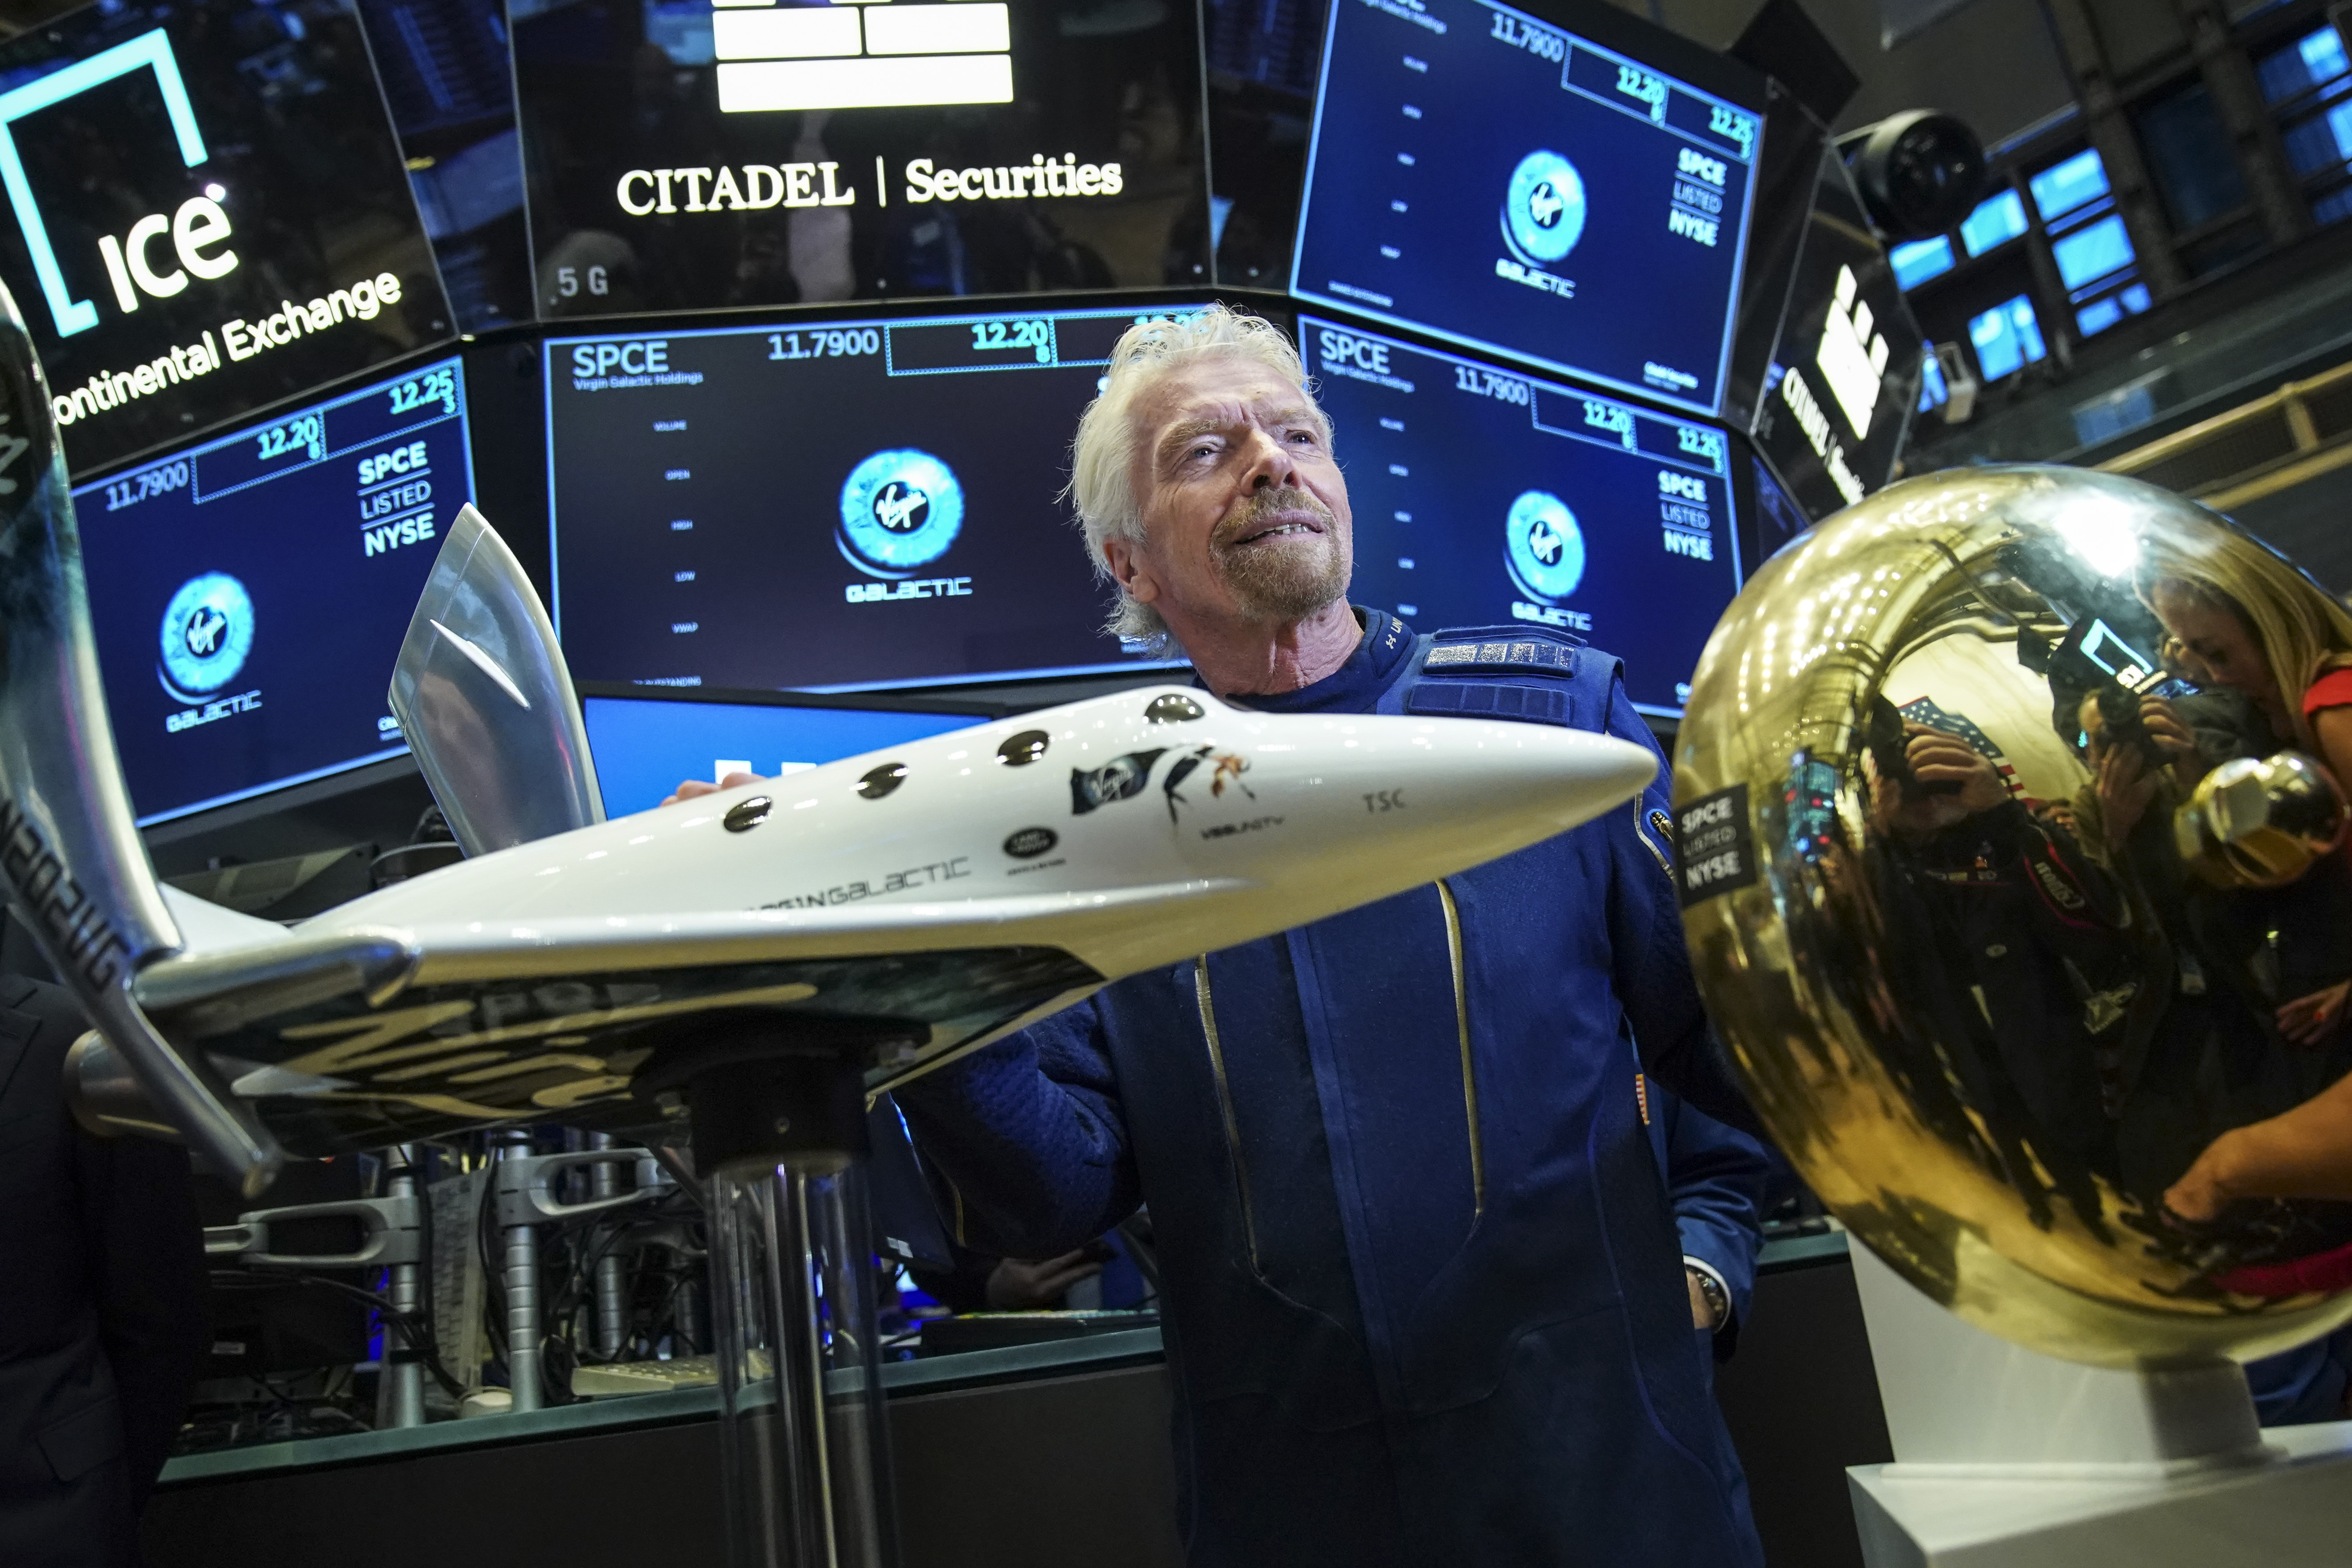 Virgin Galactic reports high interest as it readies to reopen space flight ticket sales